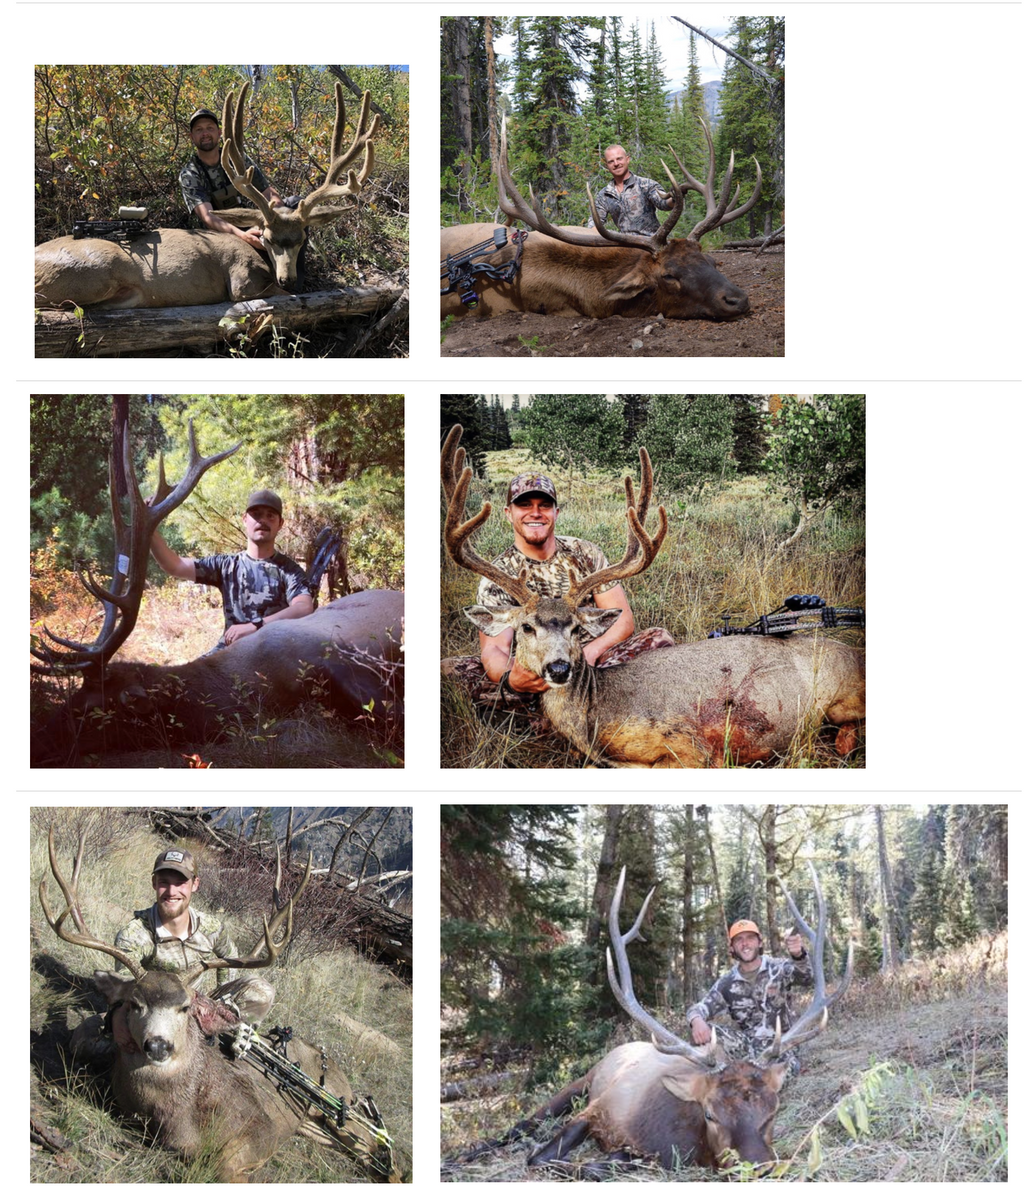 A New Generation of Avid Archery Hunters to Follow in 2020